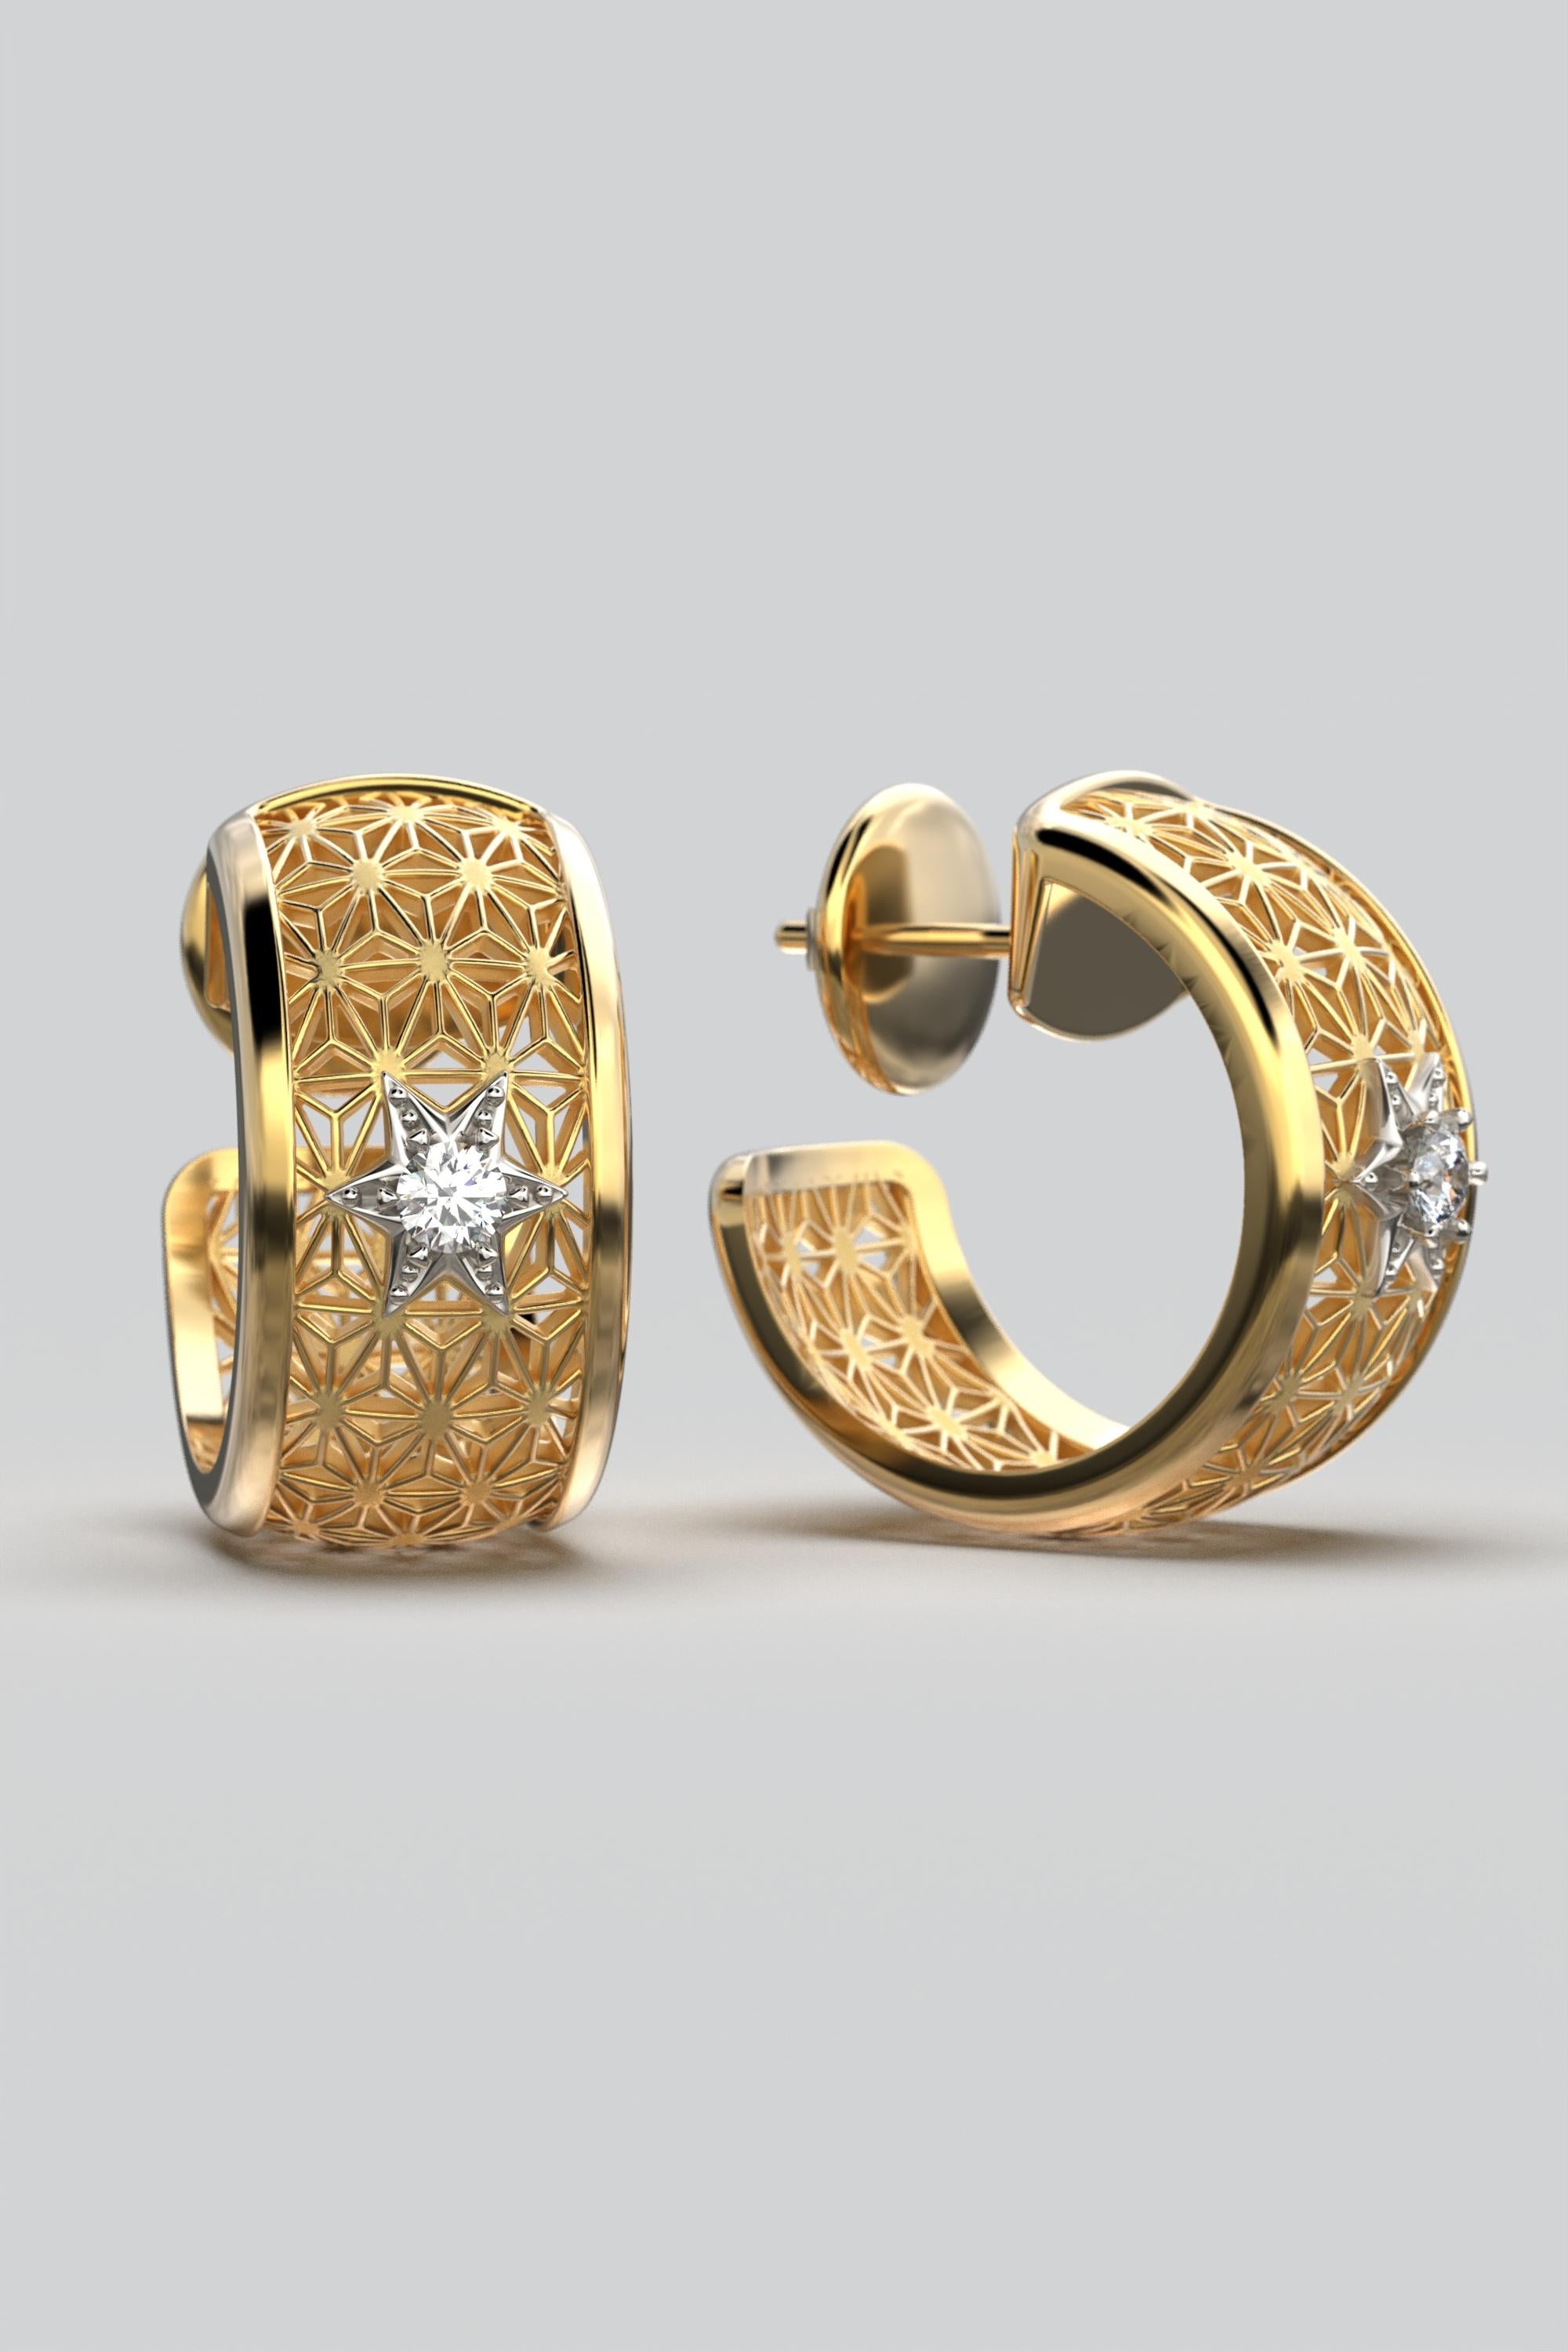 Indulge in Italian craftsmanship with our made to order stunning 14k Gold Open Hoop Earrings. Expertly crafted in two luxurious gold tones, these earrings boast a mesmerizing Japanese Sashiko star pattern, accentuated by two natural 3mm diamonds